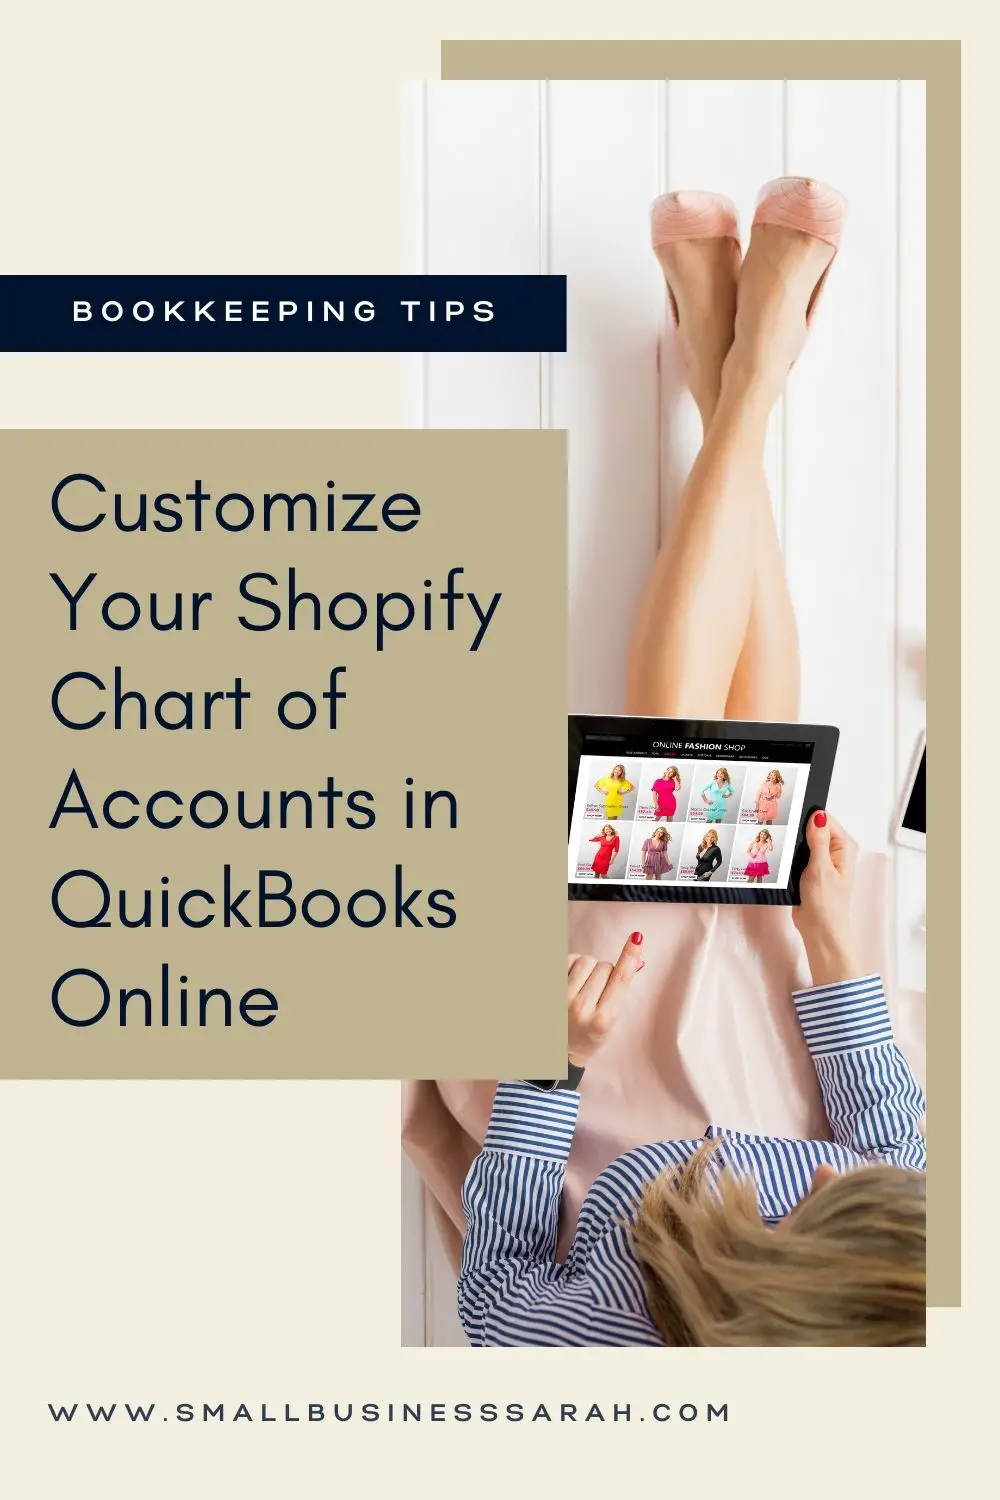 Selling on Shopify? Did you know that you can customize your chart of accounts for Shopify in QuickBooks Online? Check out this post to learn how and download the free chart of accounts.